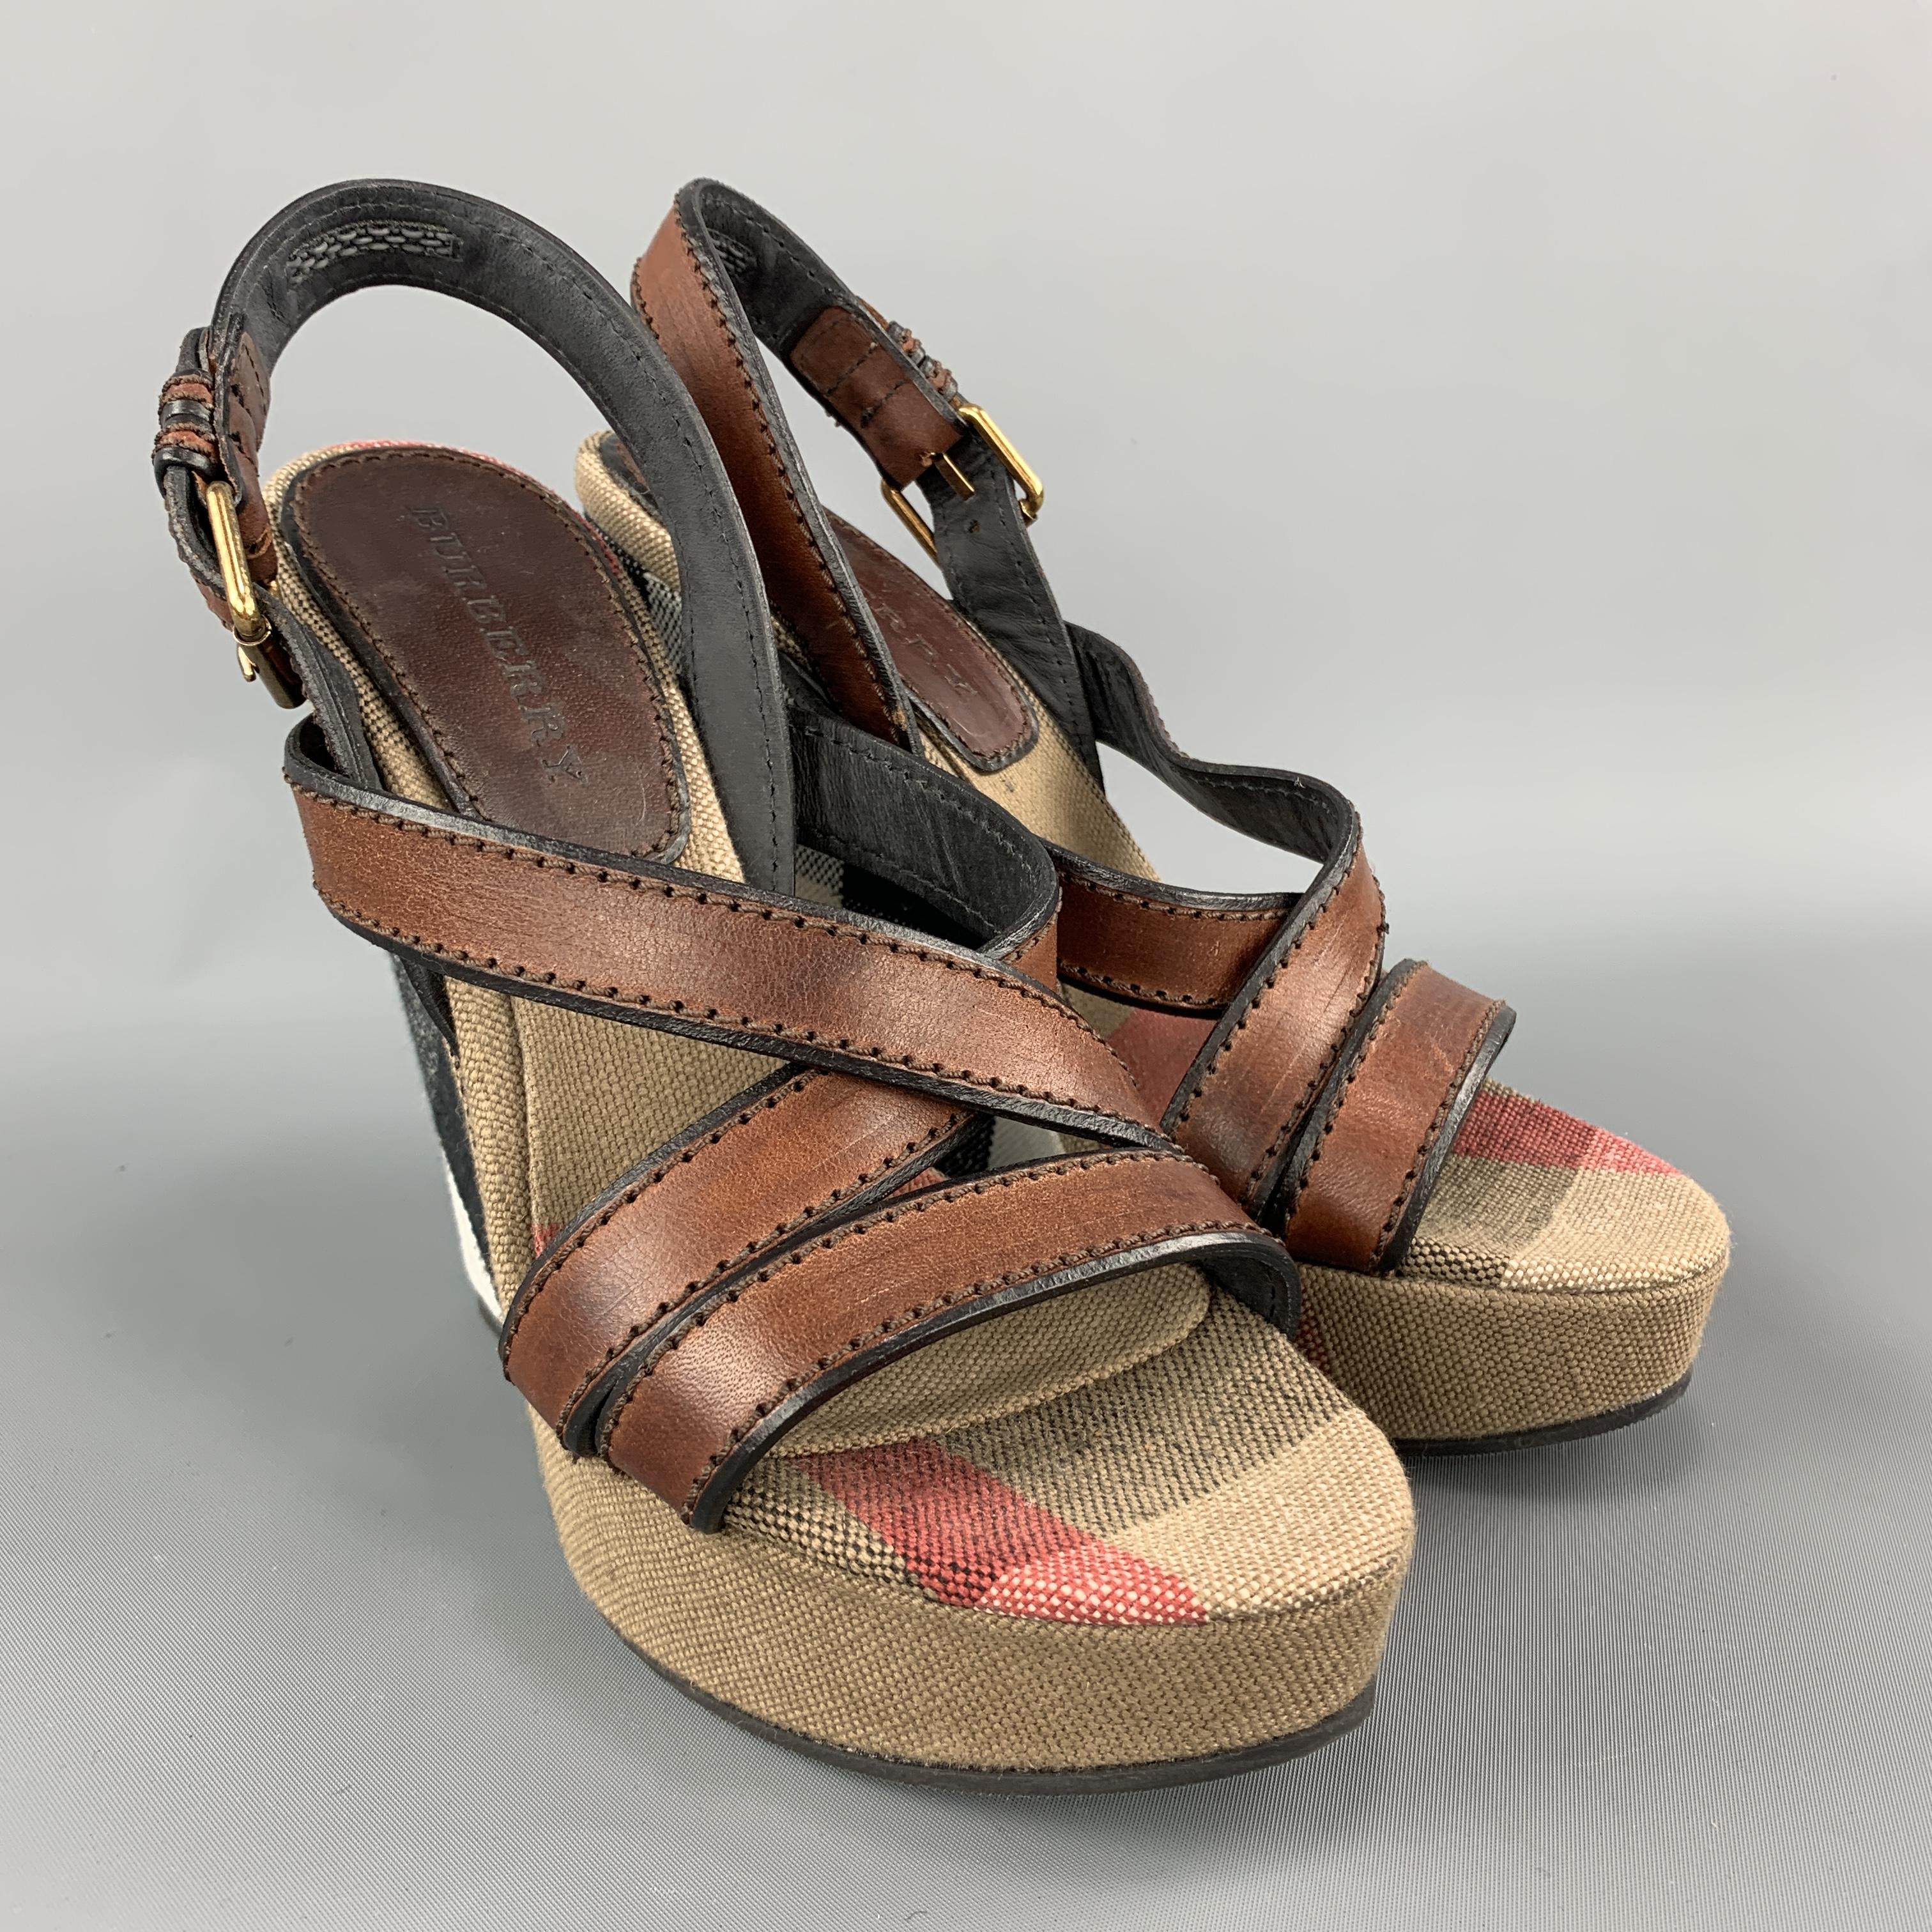 BURBERRY heels feature a signature plaid print canvas covered platform wedge heel and tan leather straps. Made in Italy.

Excellent Pre-Owned Condition.
Marked: IT 39

Heel:5.75 in.
Platform: 1.25 in.